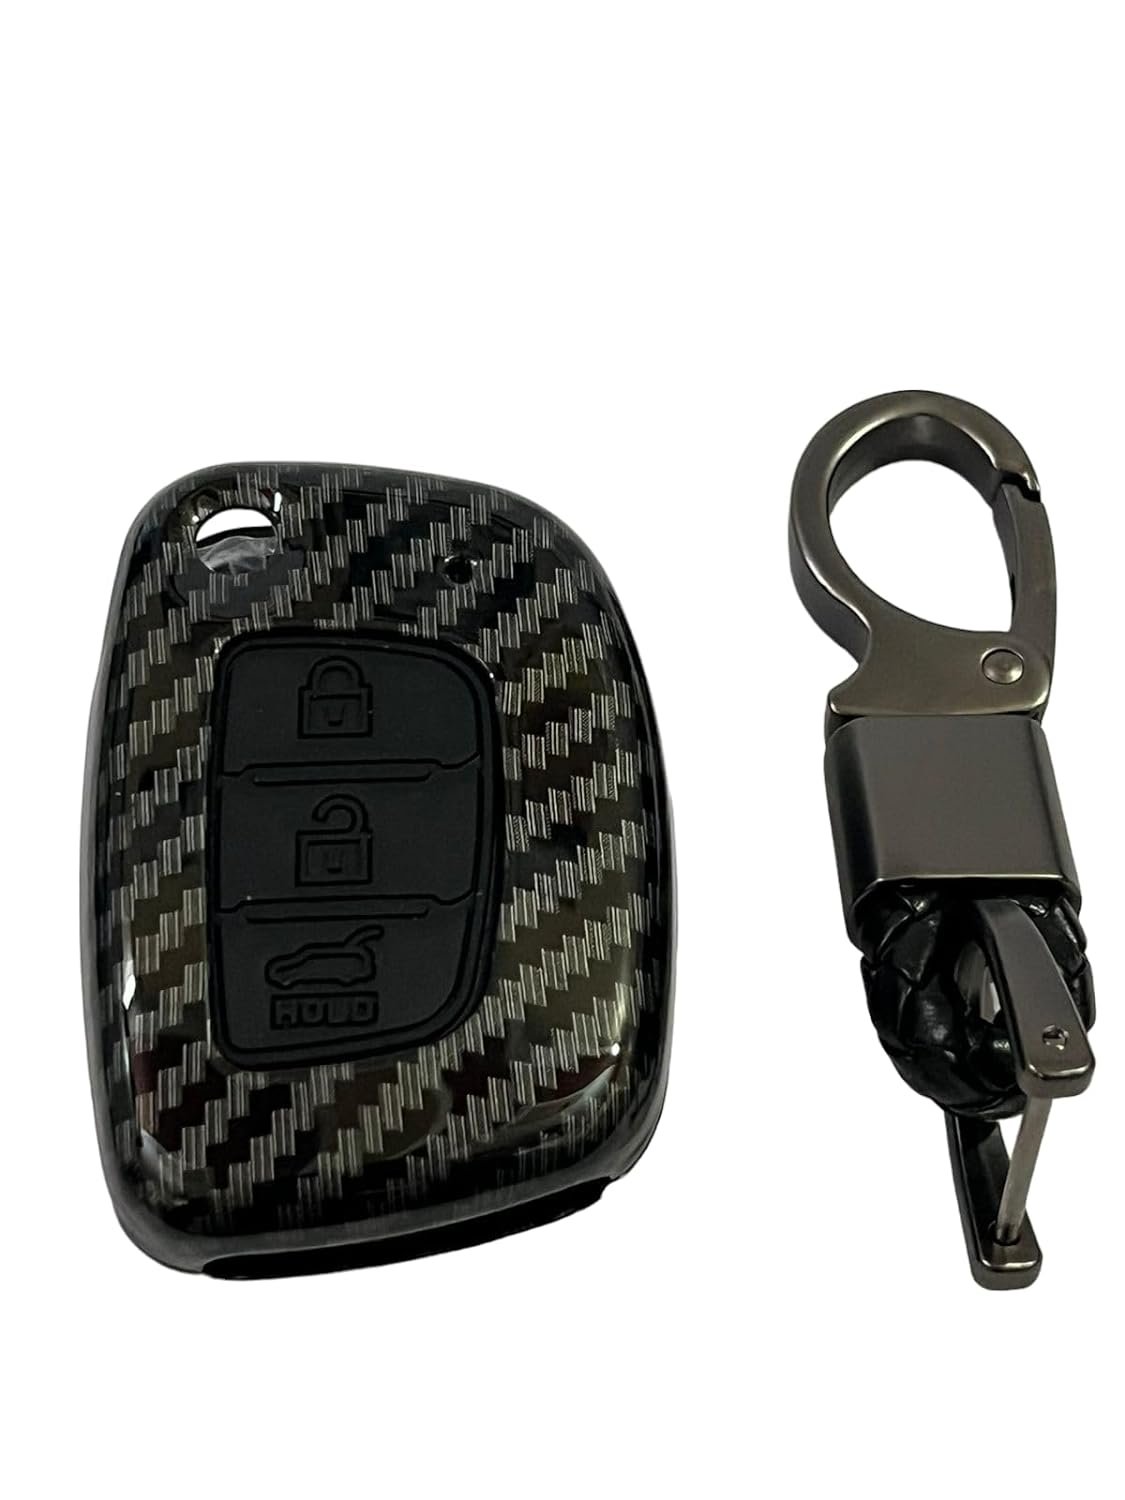 Carbon Fiber ABS Car Key Cover Compatible with Hyundai Aura, i10 Grand Nios, i20 Active 3 Button Flip Key Cover (Key Chain Included) Image 